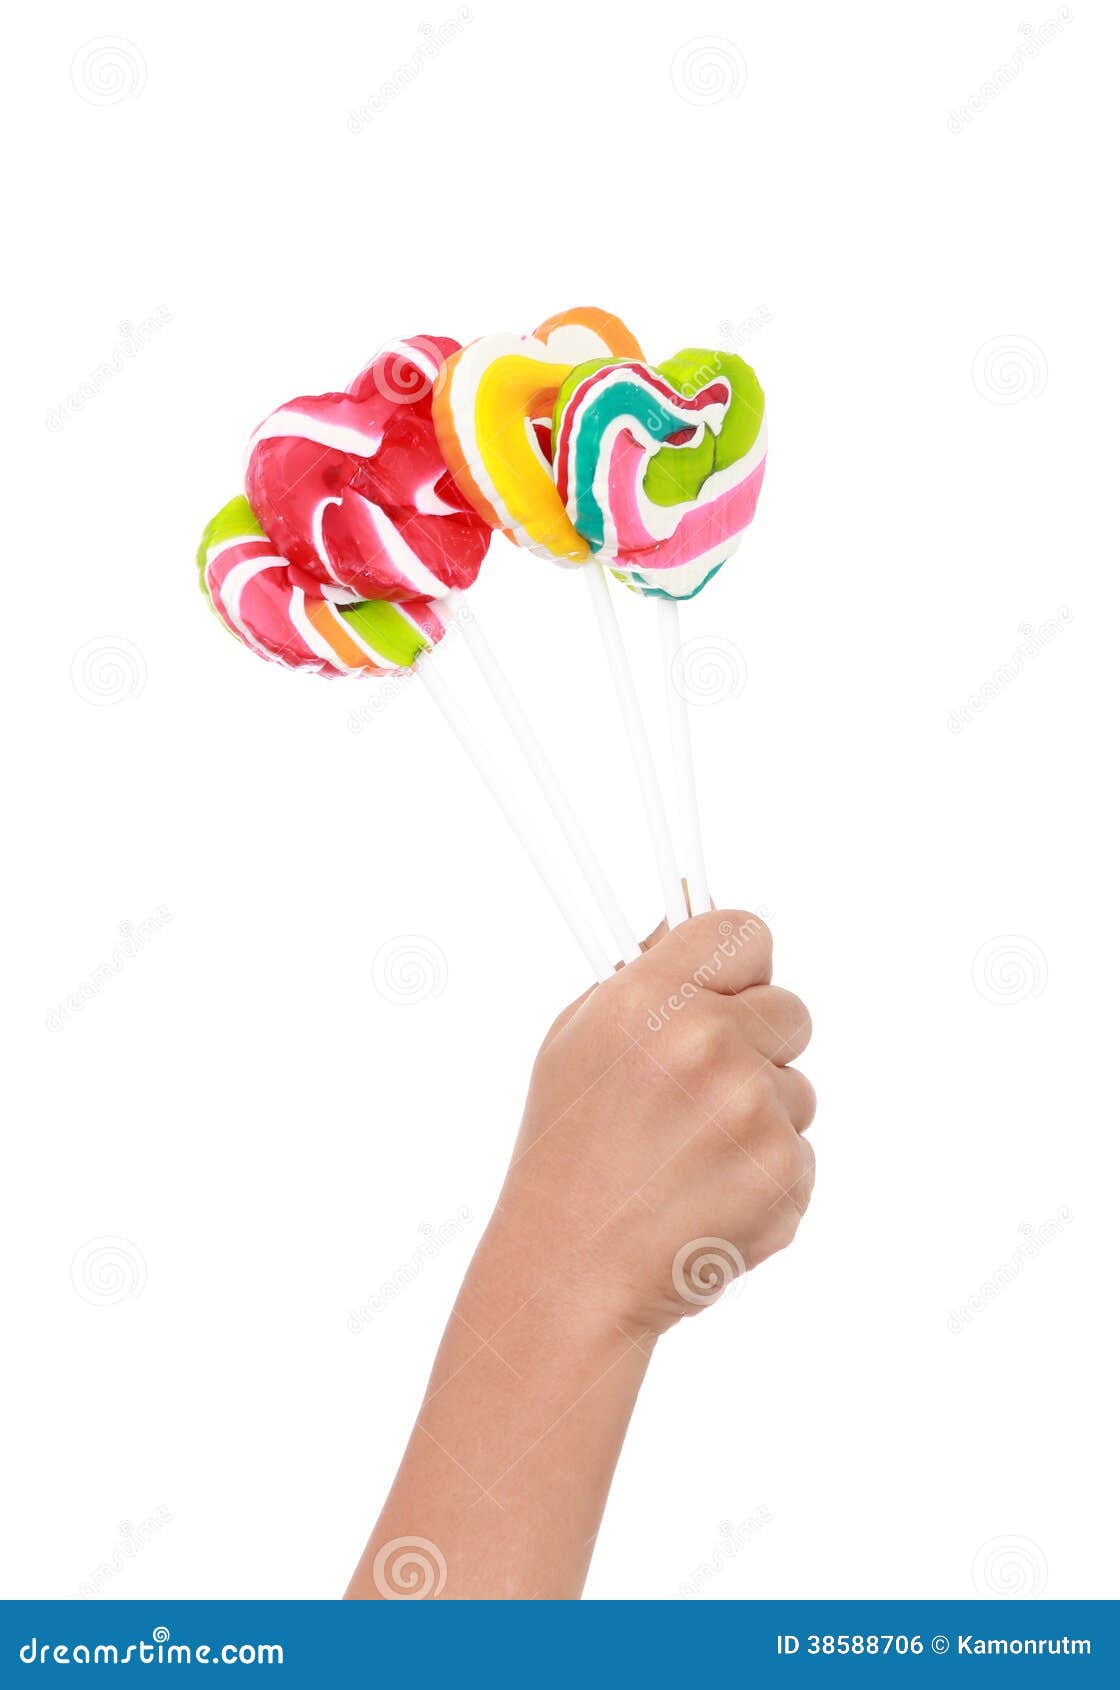 Colorful Lollipop on Children Hand Stock Photo - Image of flavor ...